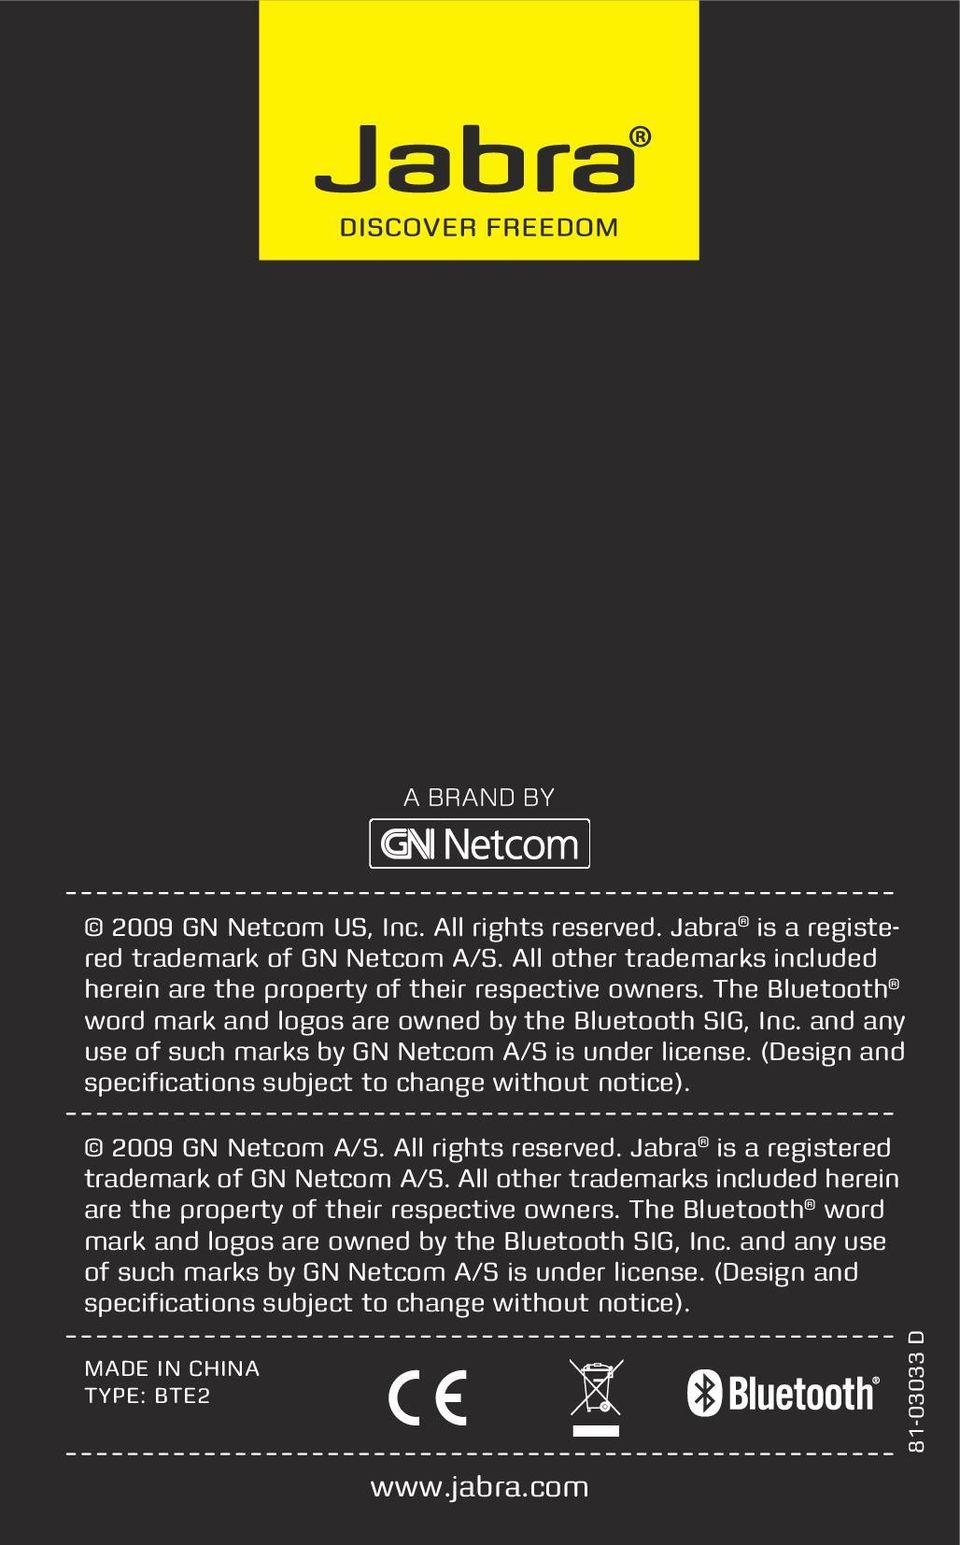 2009 GN Netcom A/S. All rights reserved. Jabra is a registered trademark of GN Netcom A/S. All other trademarks included herein are the property of their respective owners.